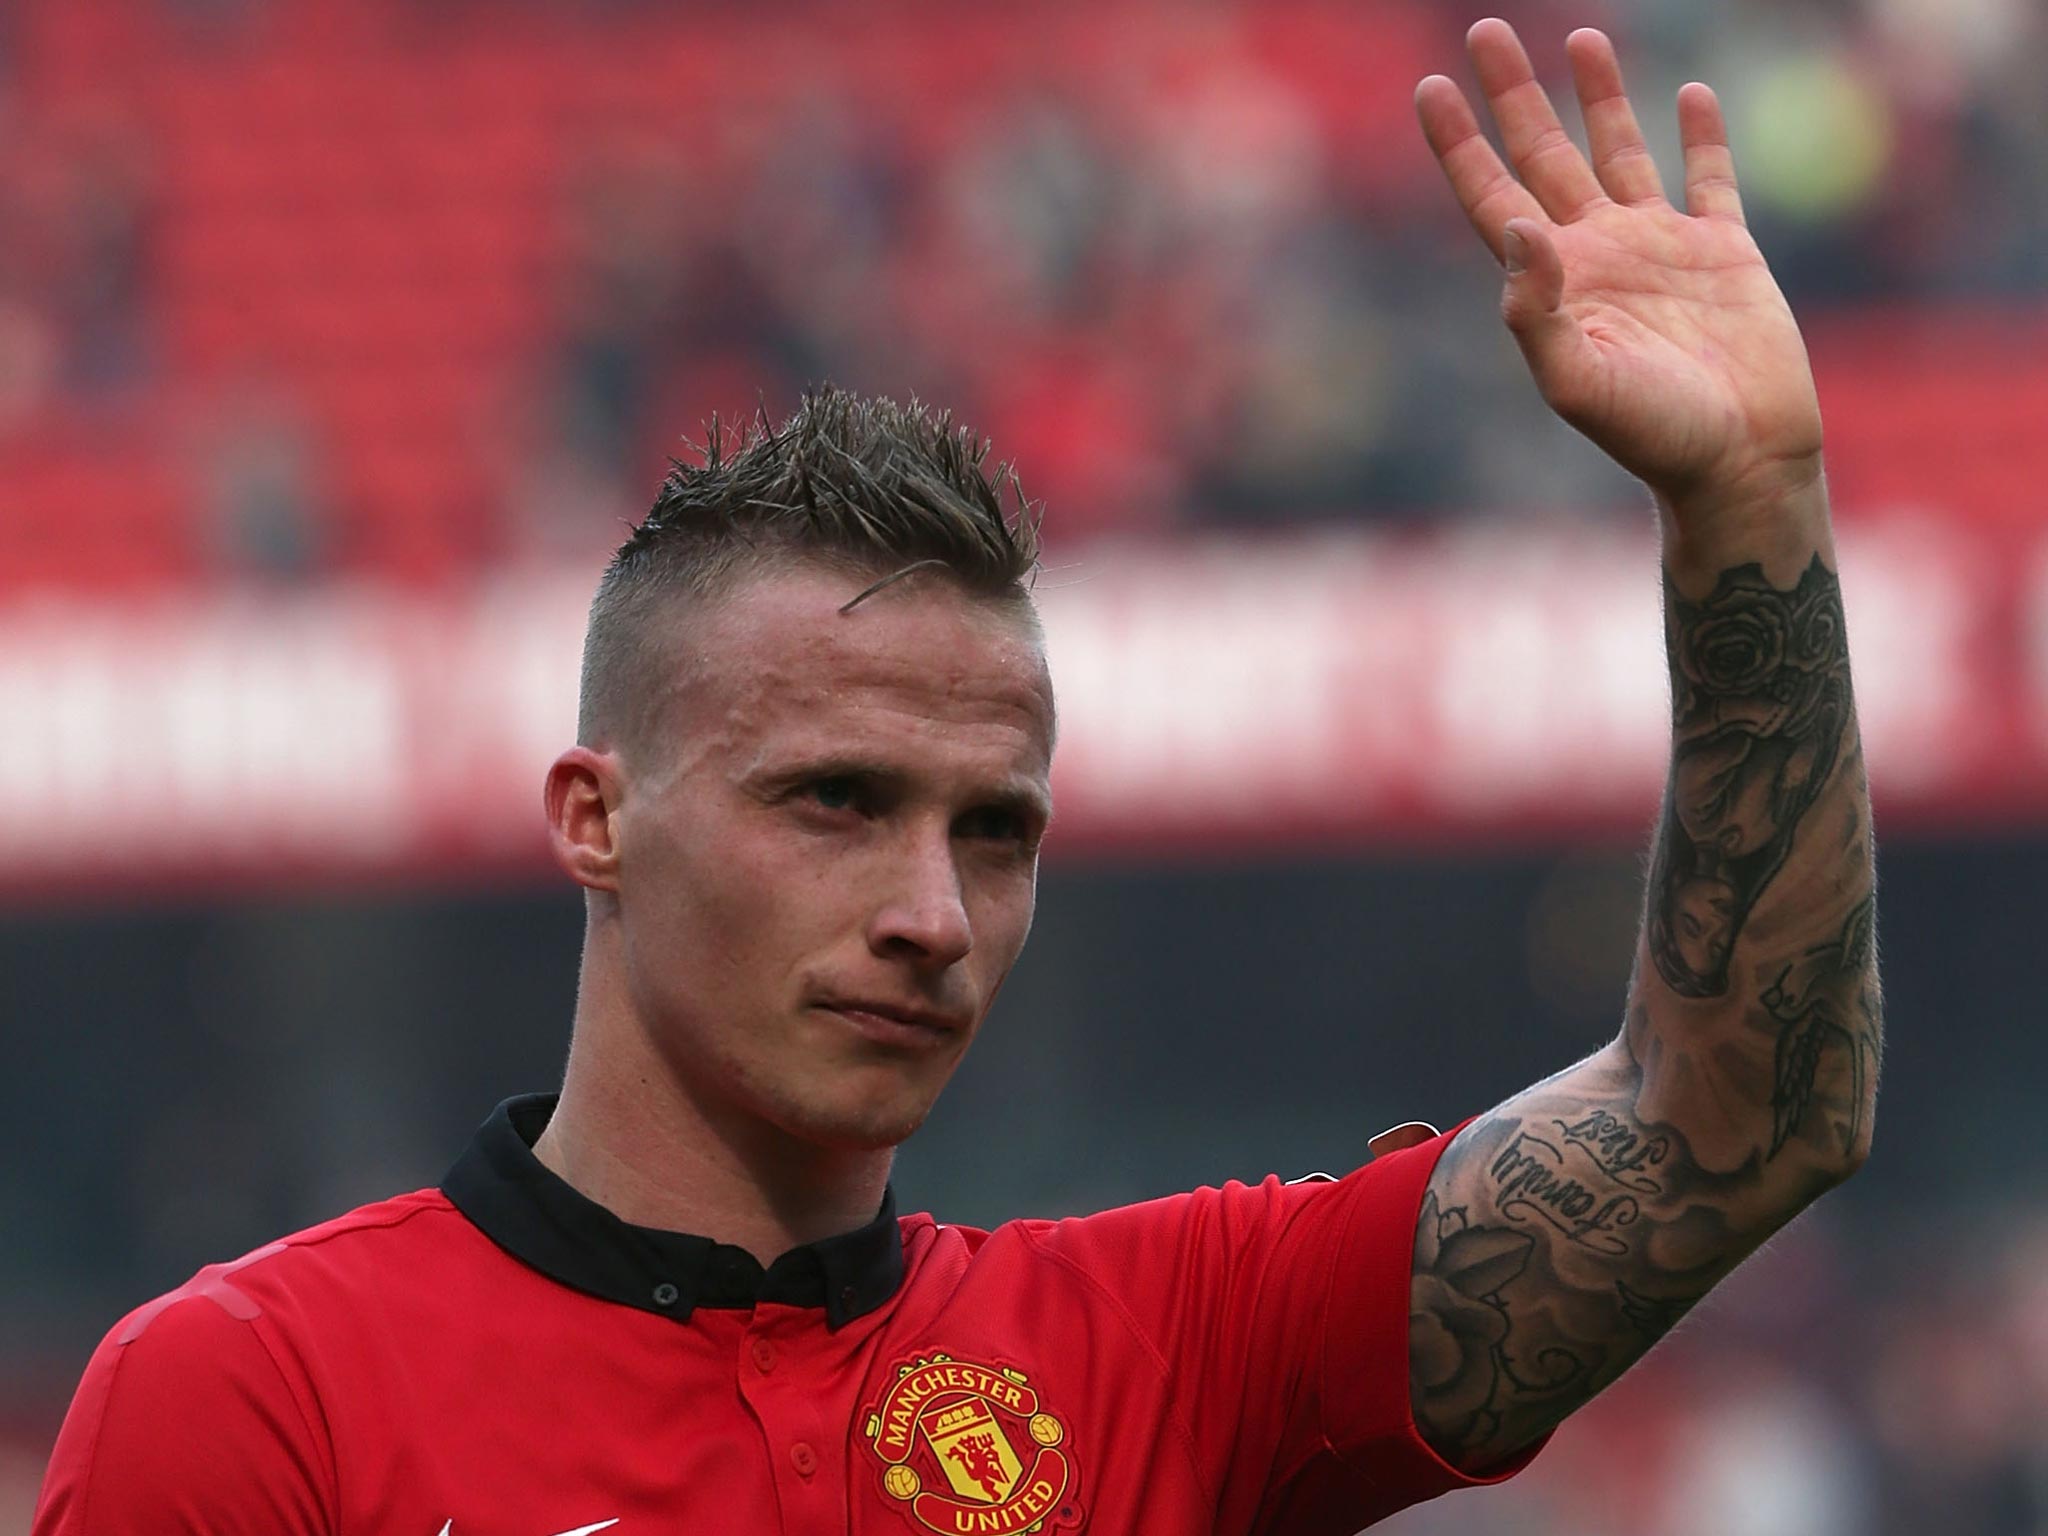 Alexander Buttner believes he is capable of containing Arjen Robben when Manchester United take on Bayern Munich